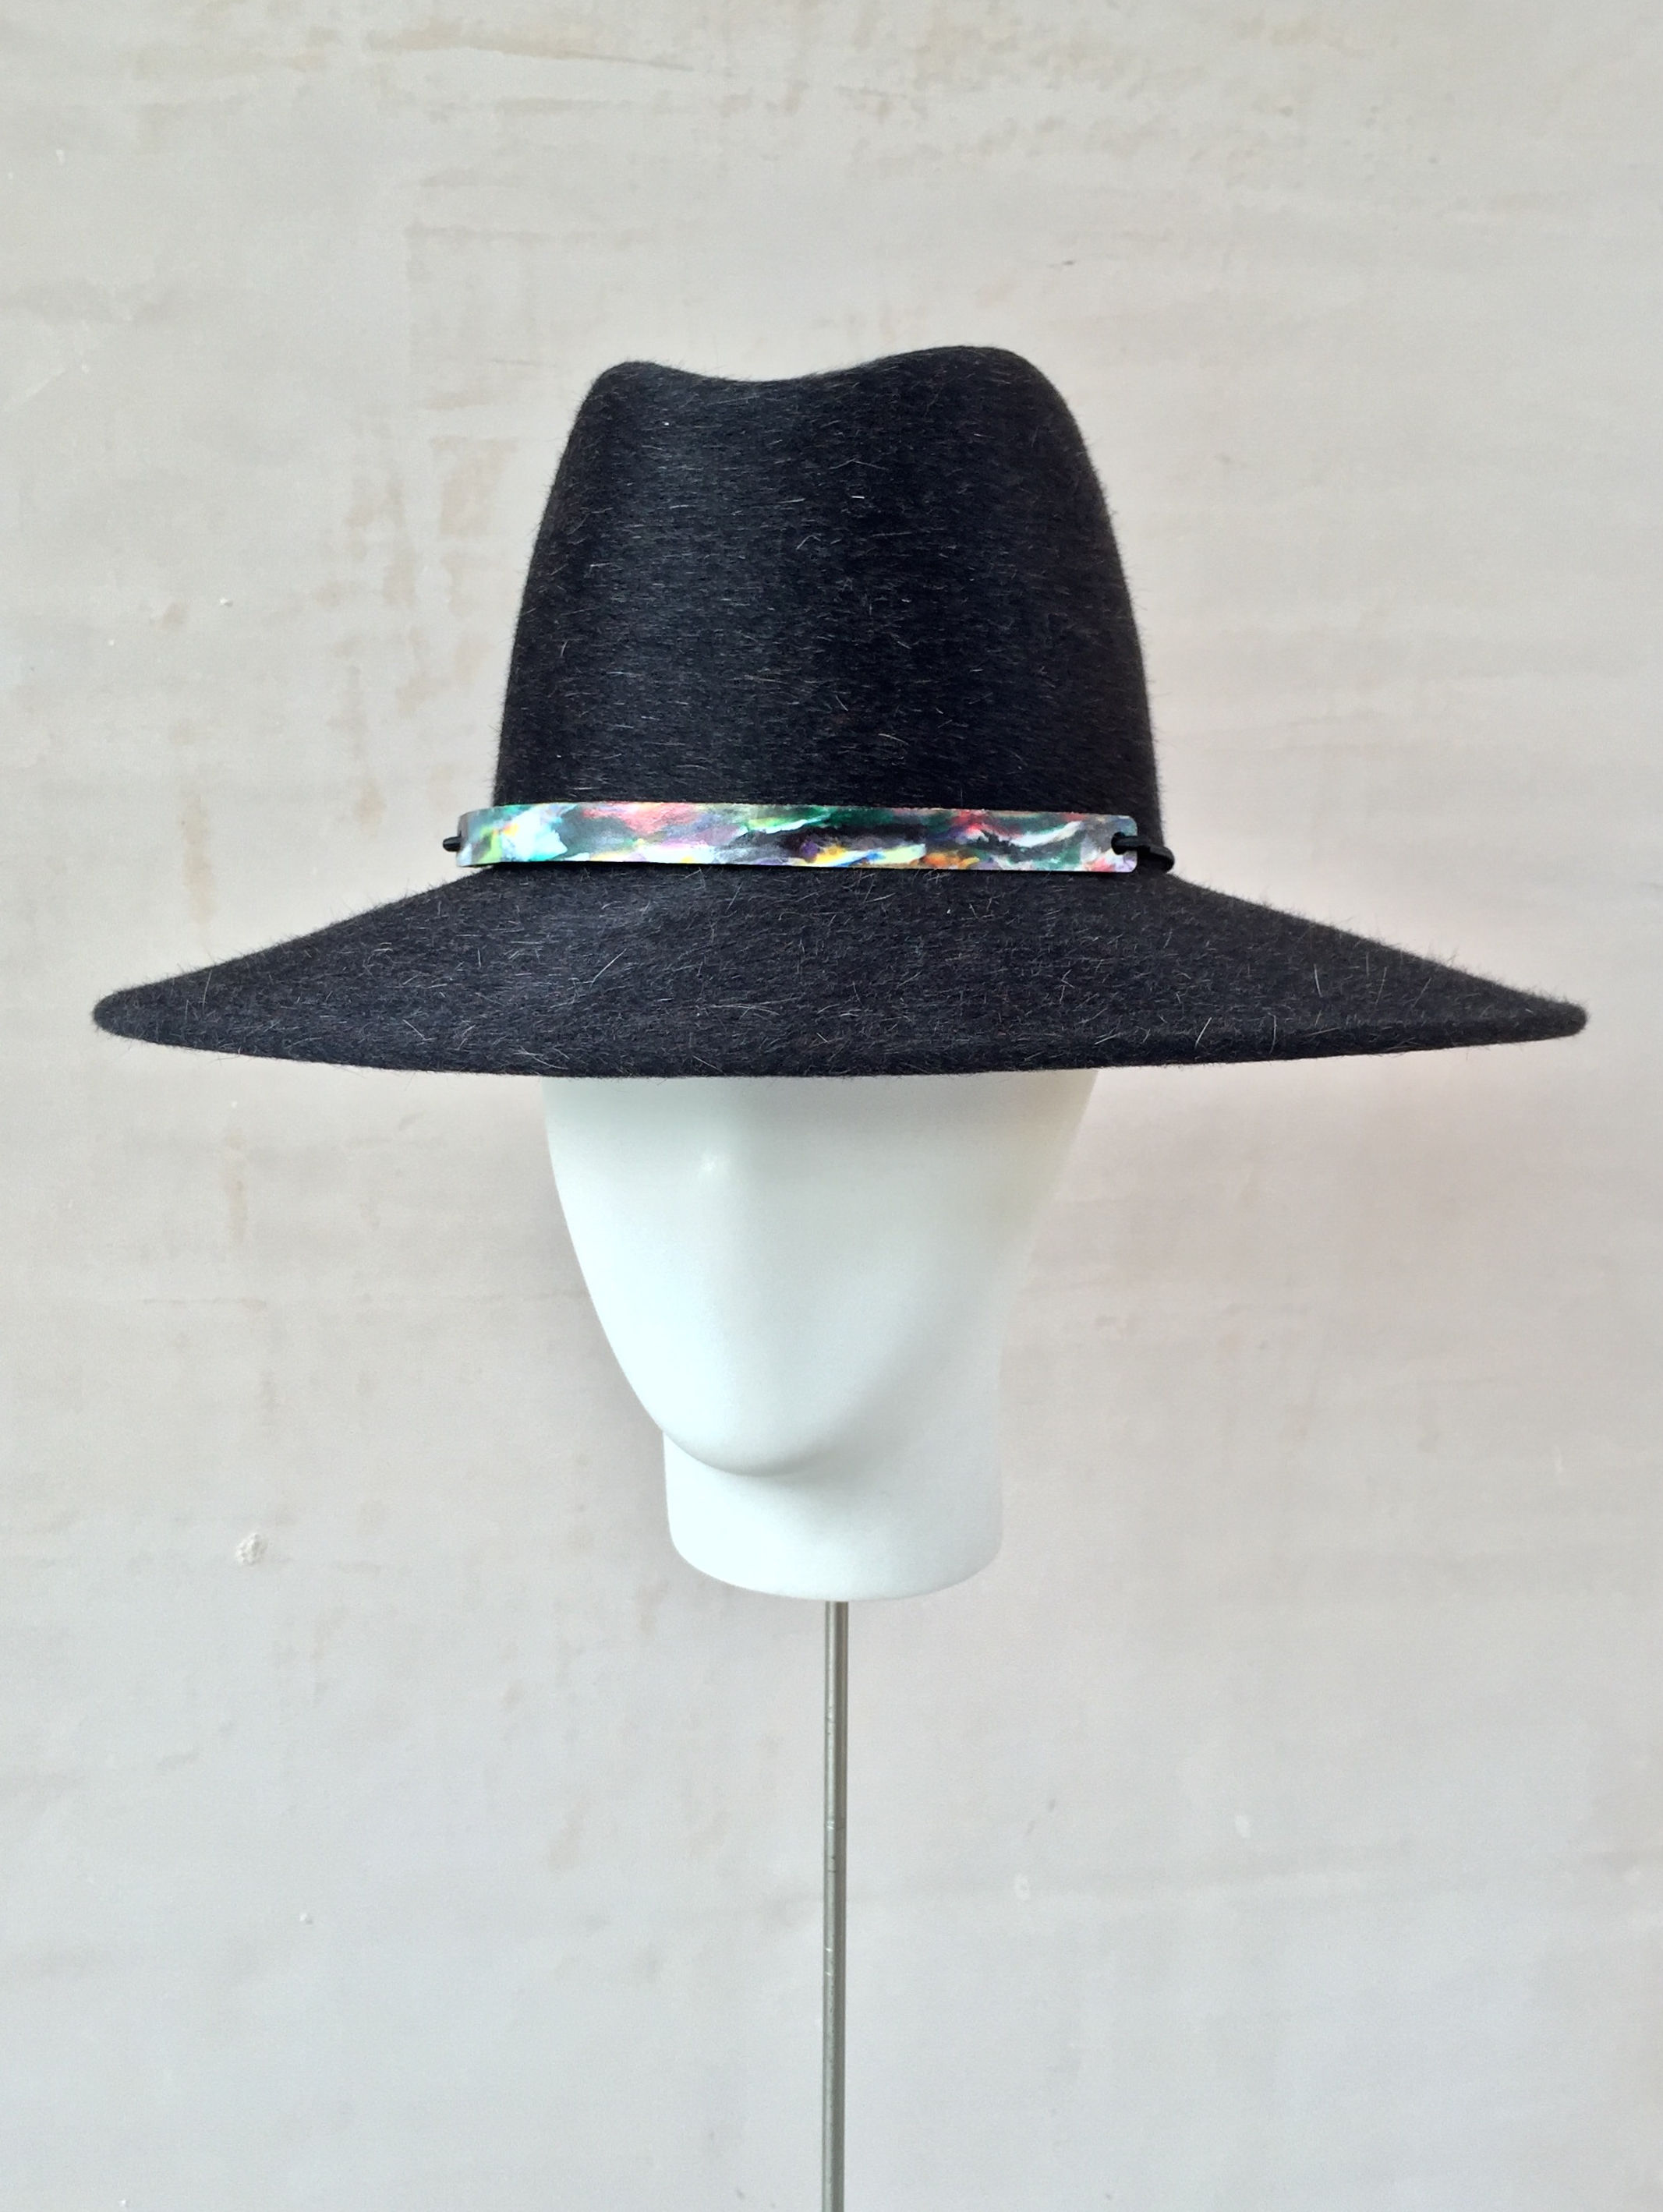 Mohair Tall Crown Felt & Recycled Plastic Band